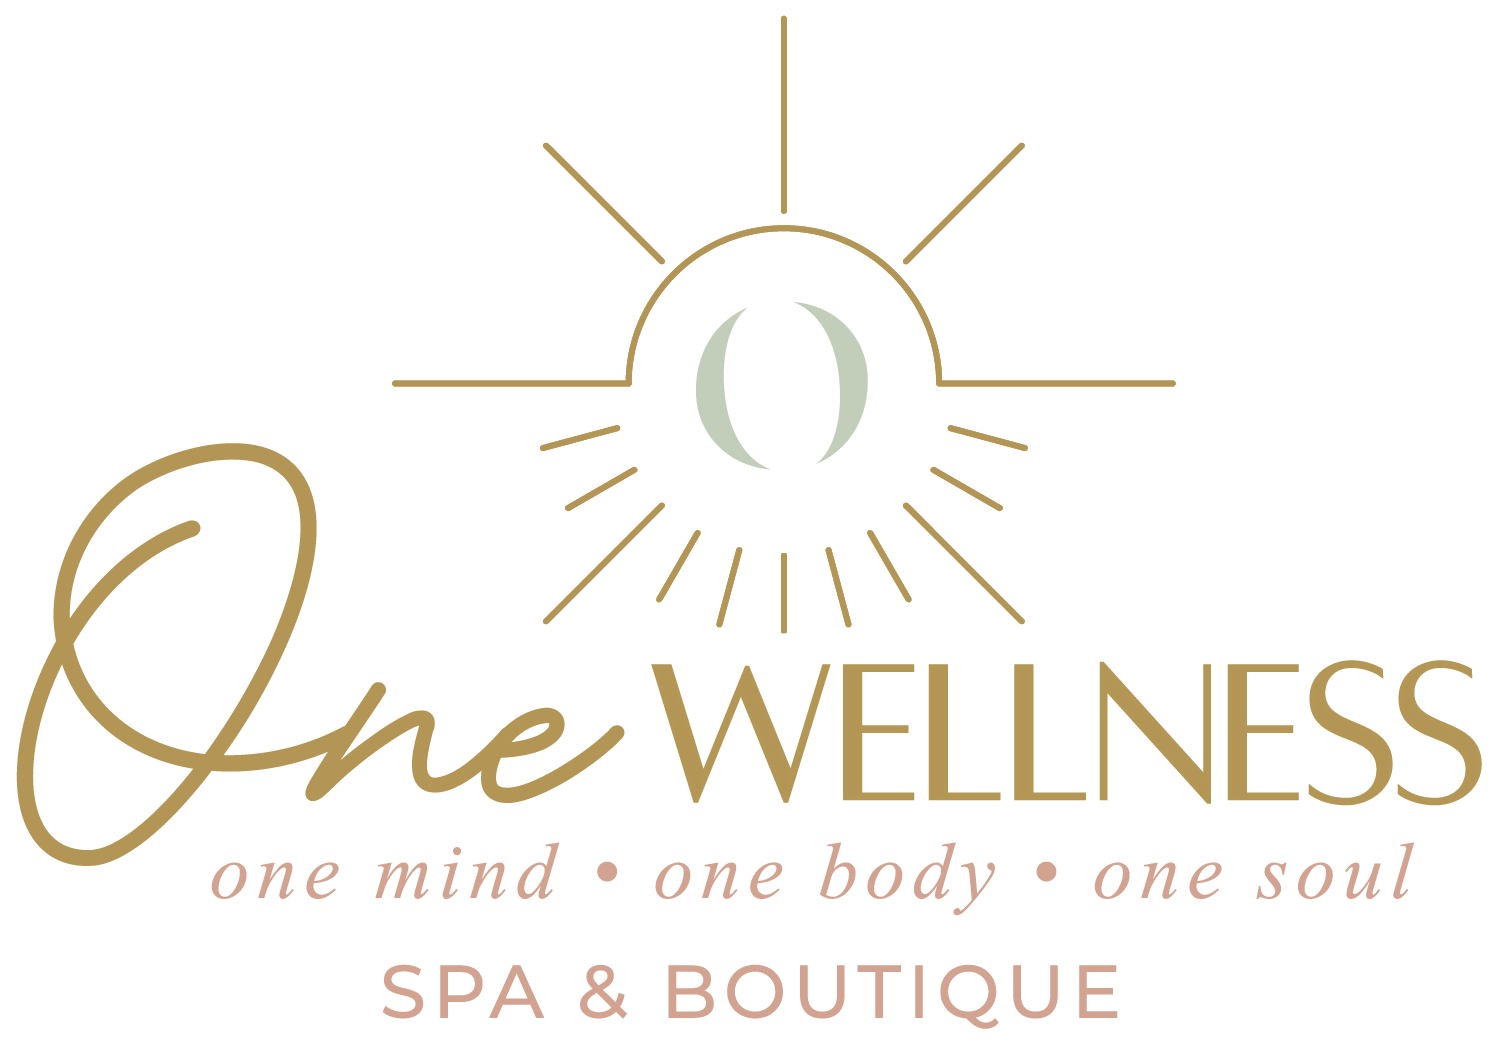 One Wellness Spa & Boutique